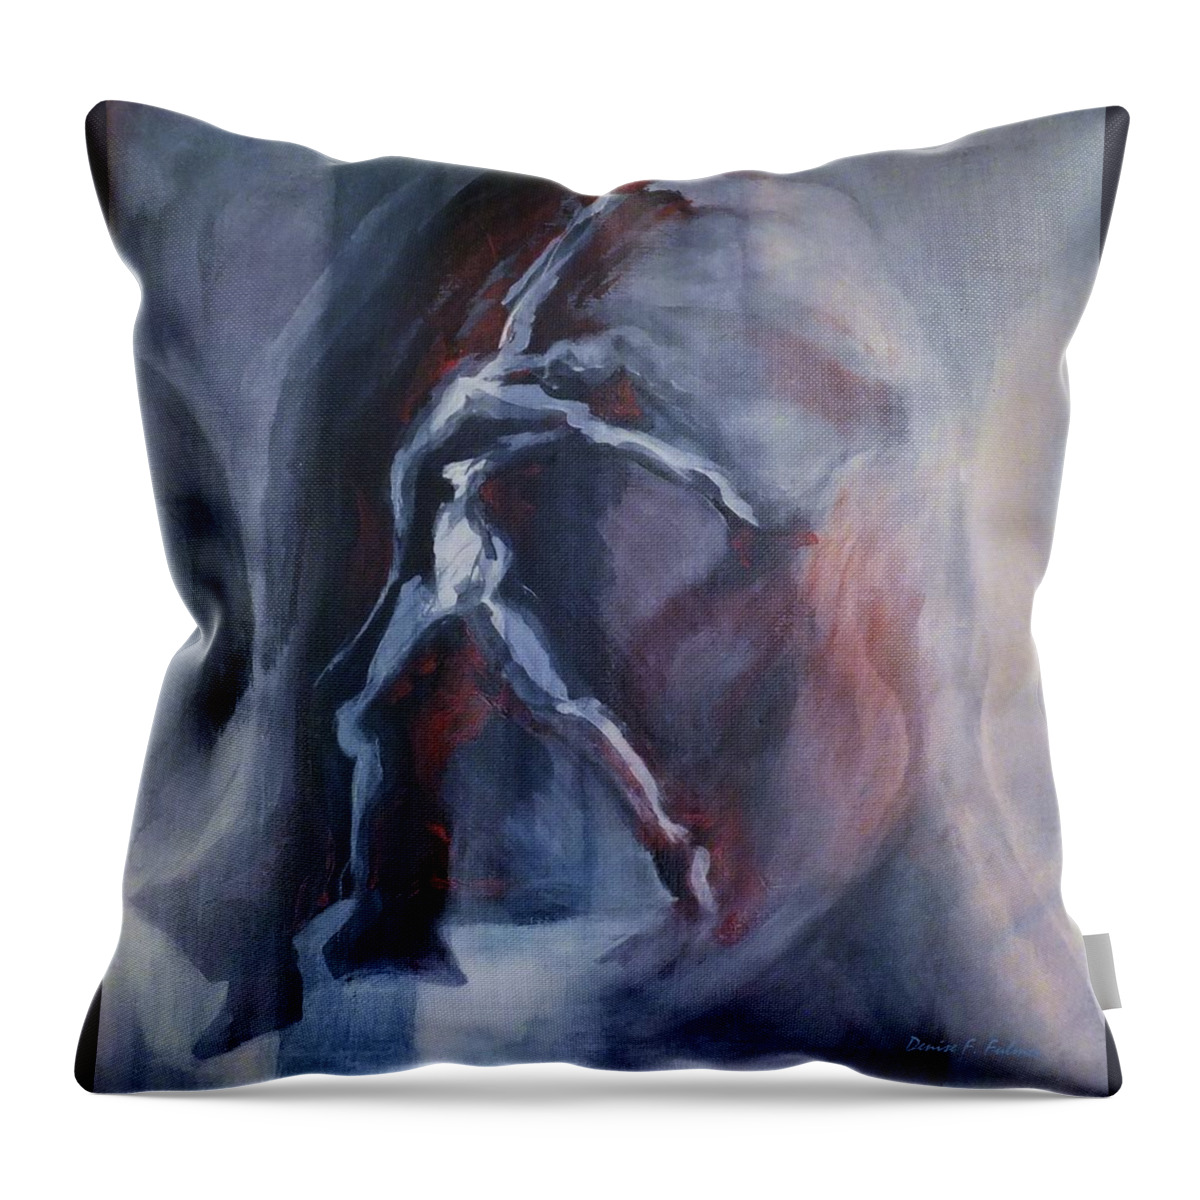 Dancer Throw Pillow featuring the painting Dancing Figure by Denise F Fulmer